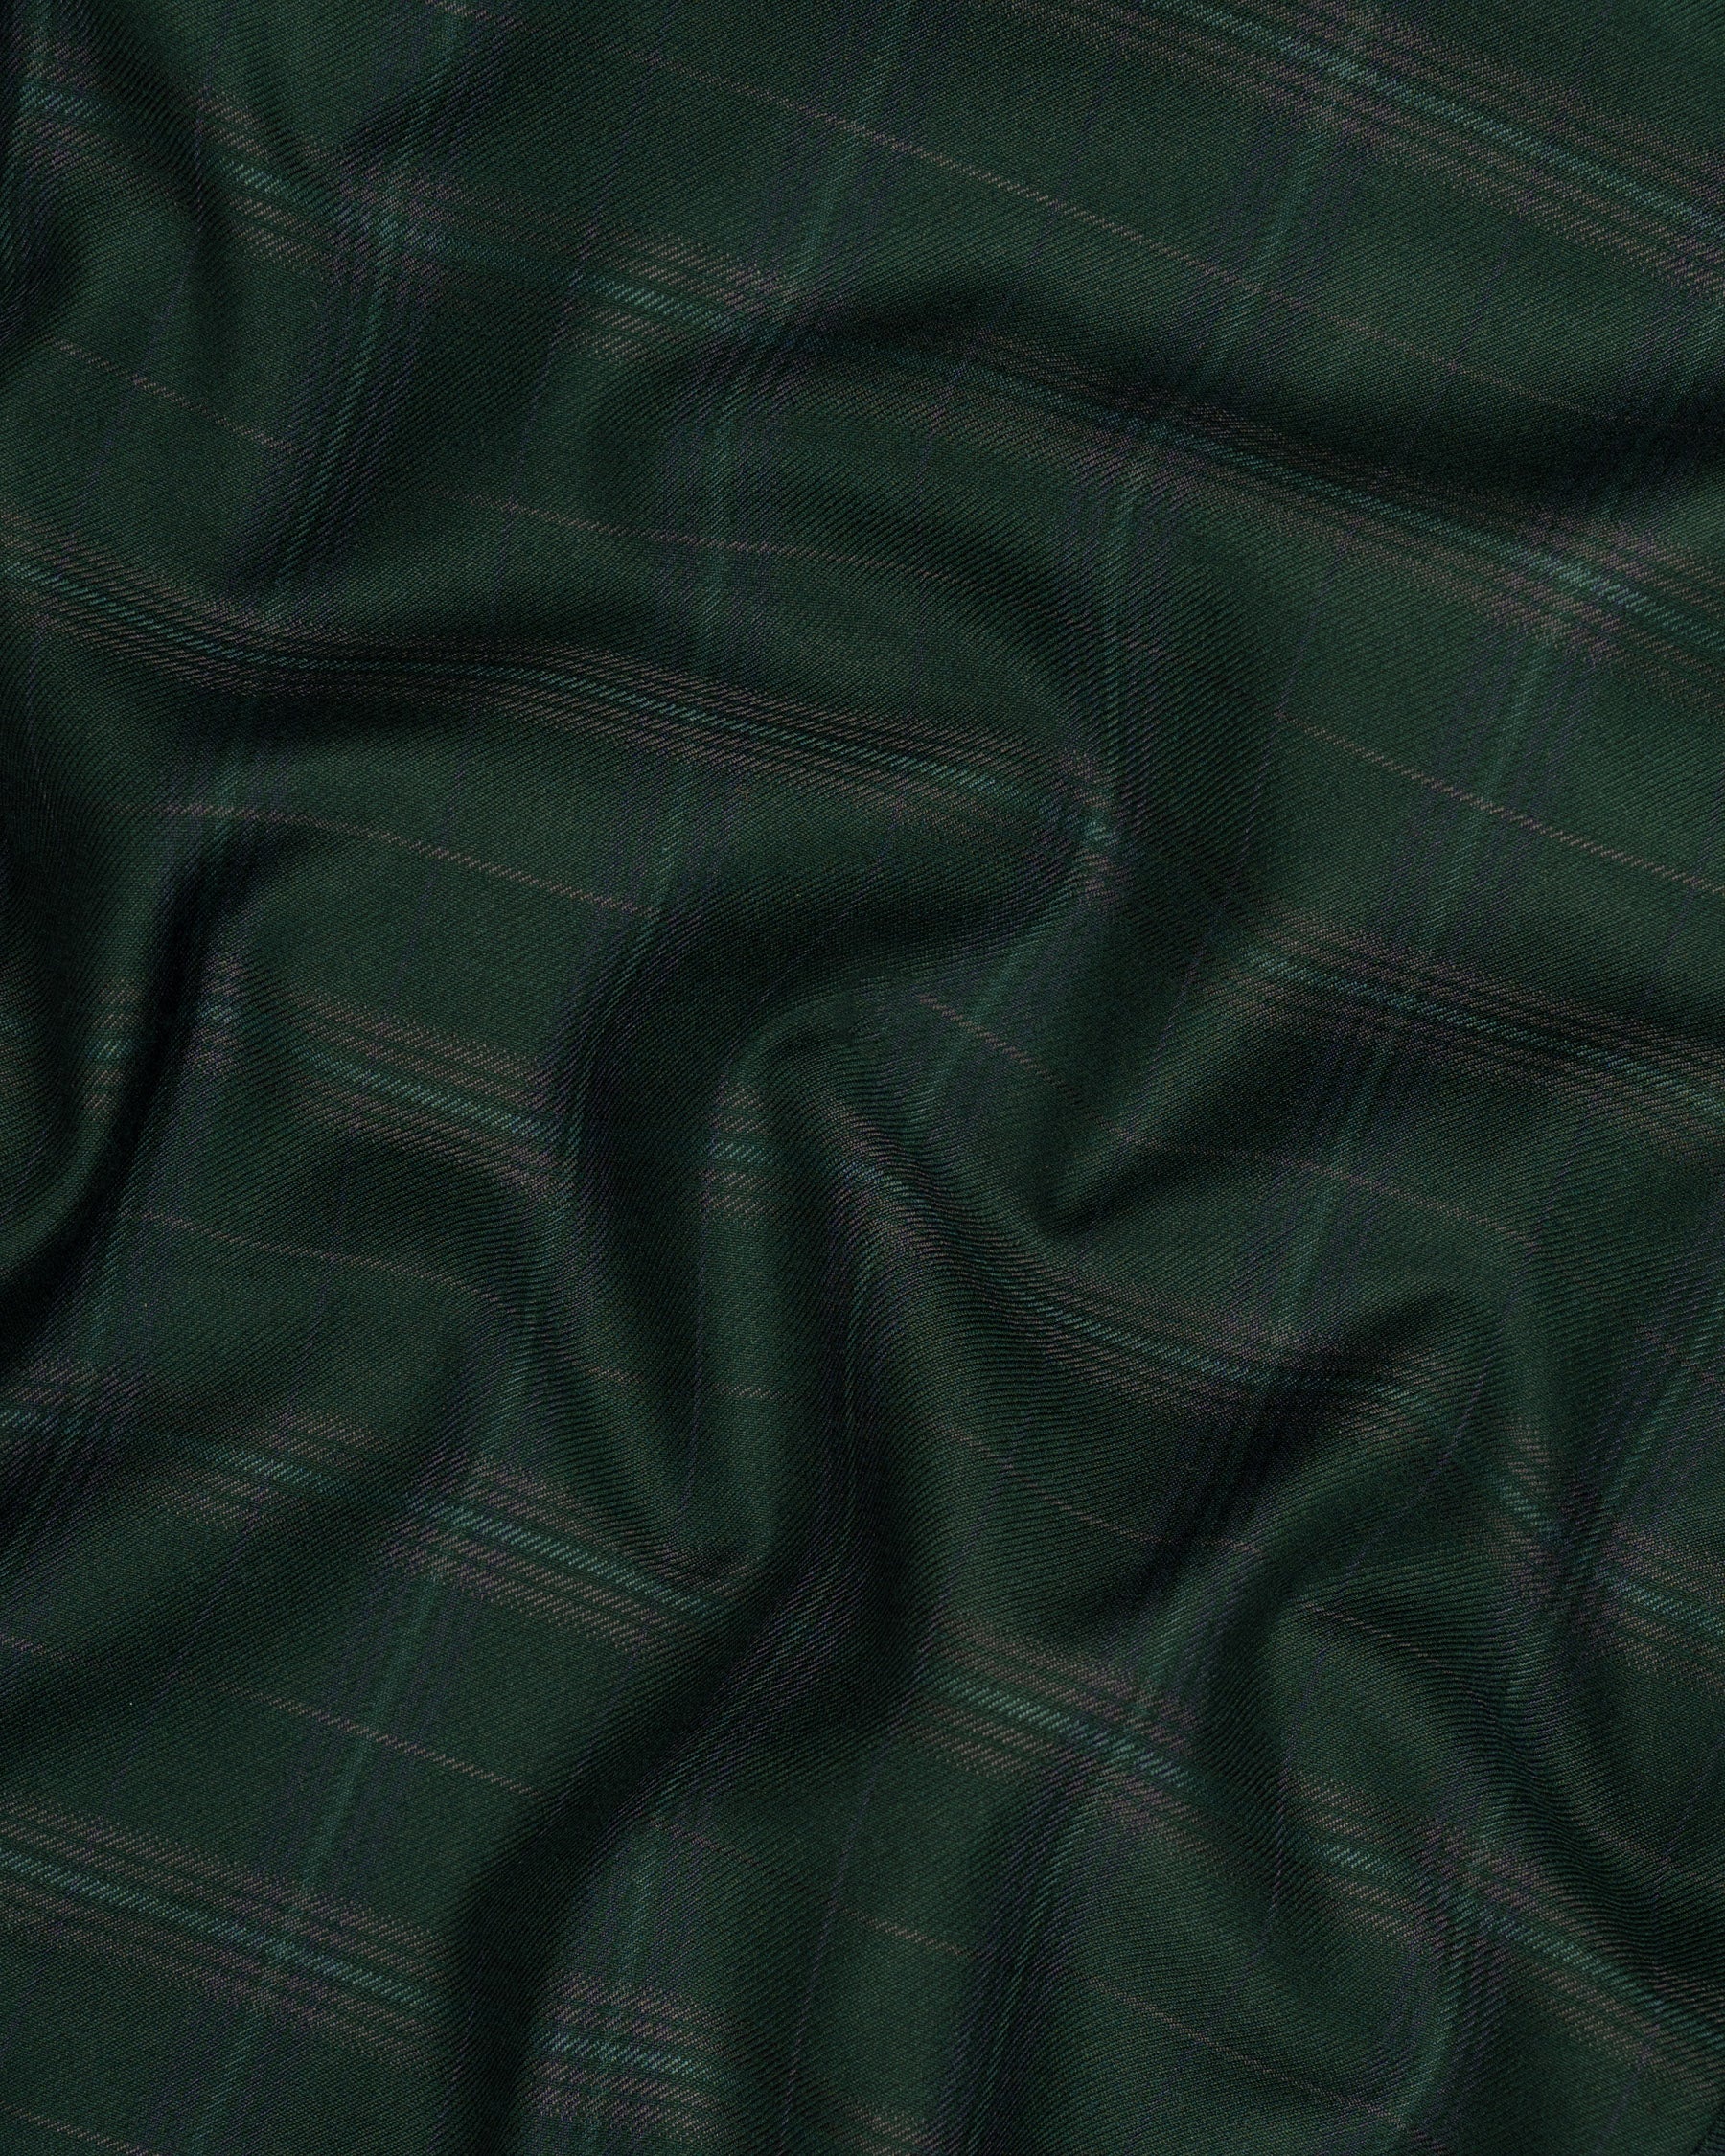 Celtic Green Super fine Plaid Double Breasted Woolrich Blazer BL1629-DB-36, BL1629-DB-38, BL1629-DB-40, BL1629-DB-42, BL1629-DB-44, BL1629-DB-46, BL1629-DB-48, BL1629-DB-50, BL1629-DB-52, BL1629-DB-54, BL1629-DB-56, BL1629-DB-58, BL1629-DB-60